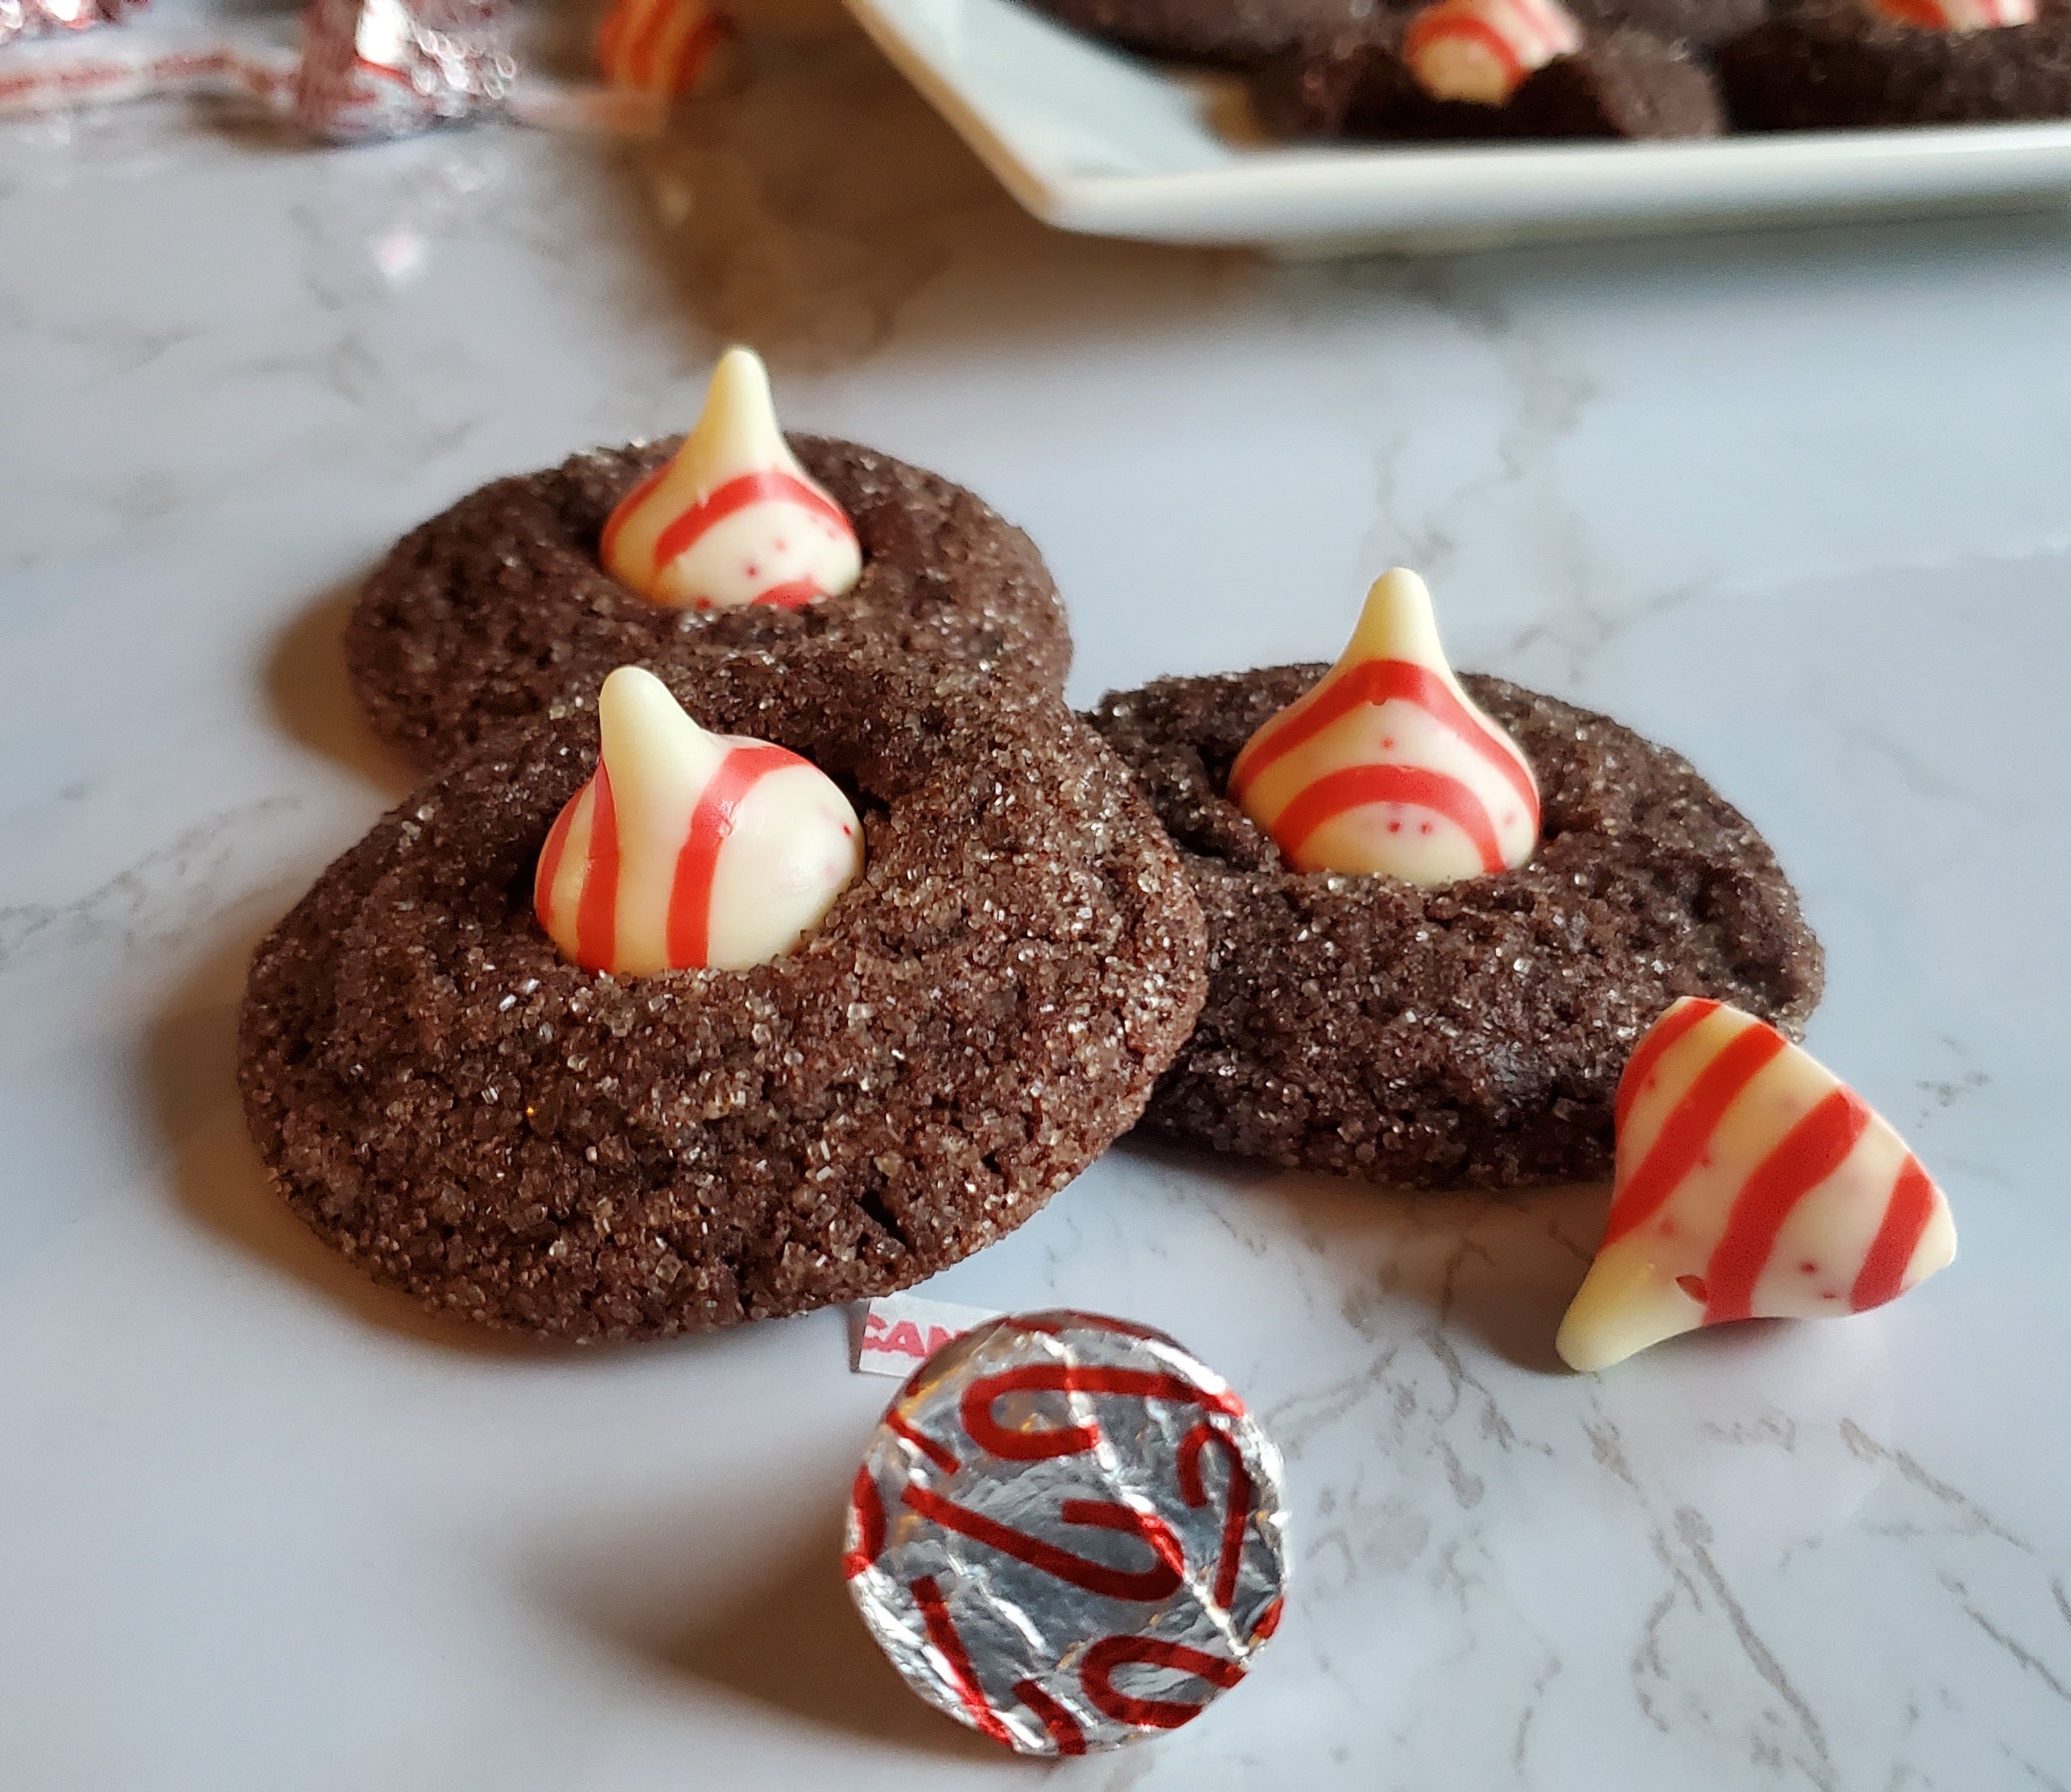 Chocolate cookies, rolled in sugar with a white chocolate candy cane hershey's kiss in the top. There are three stacked around each other with candies and wrappers around them.